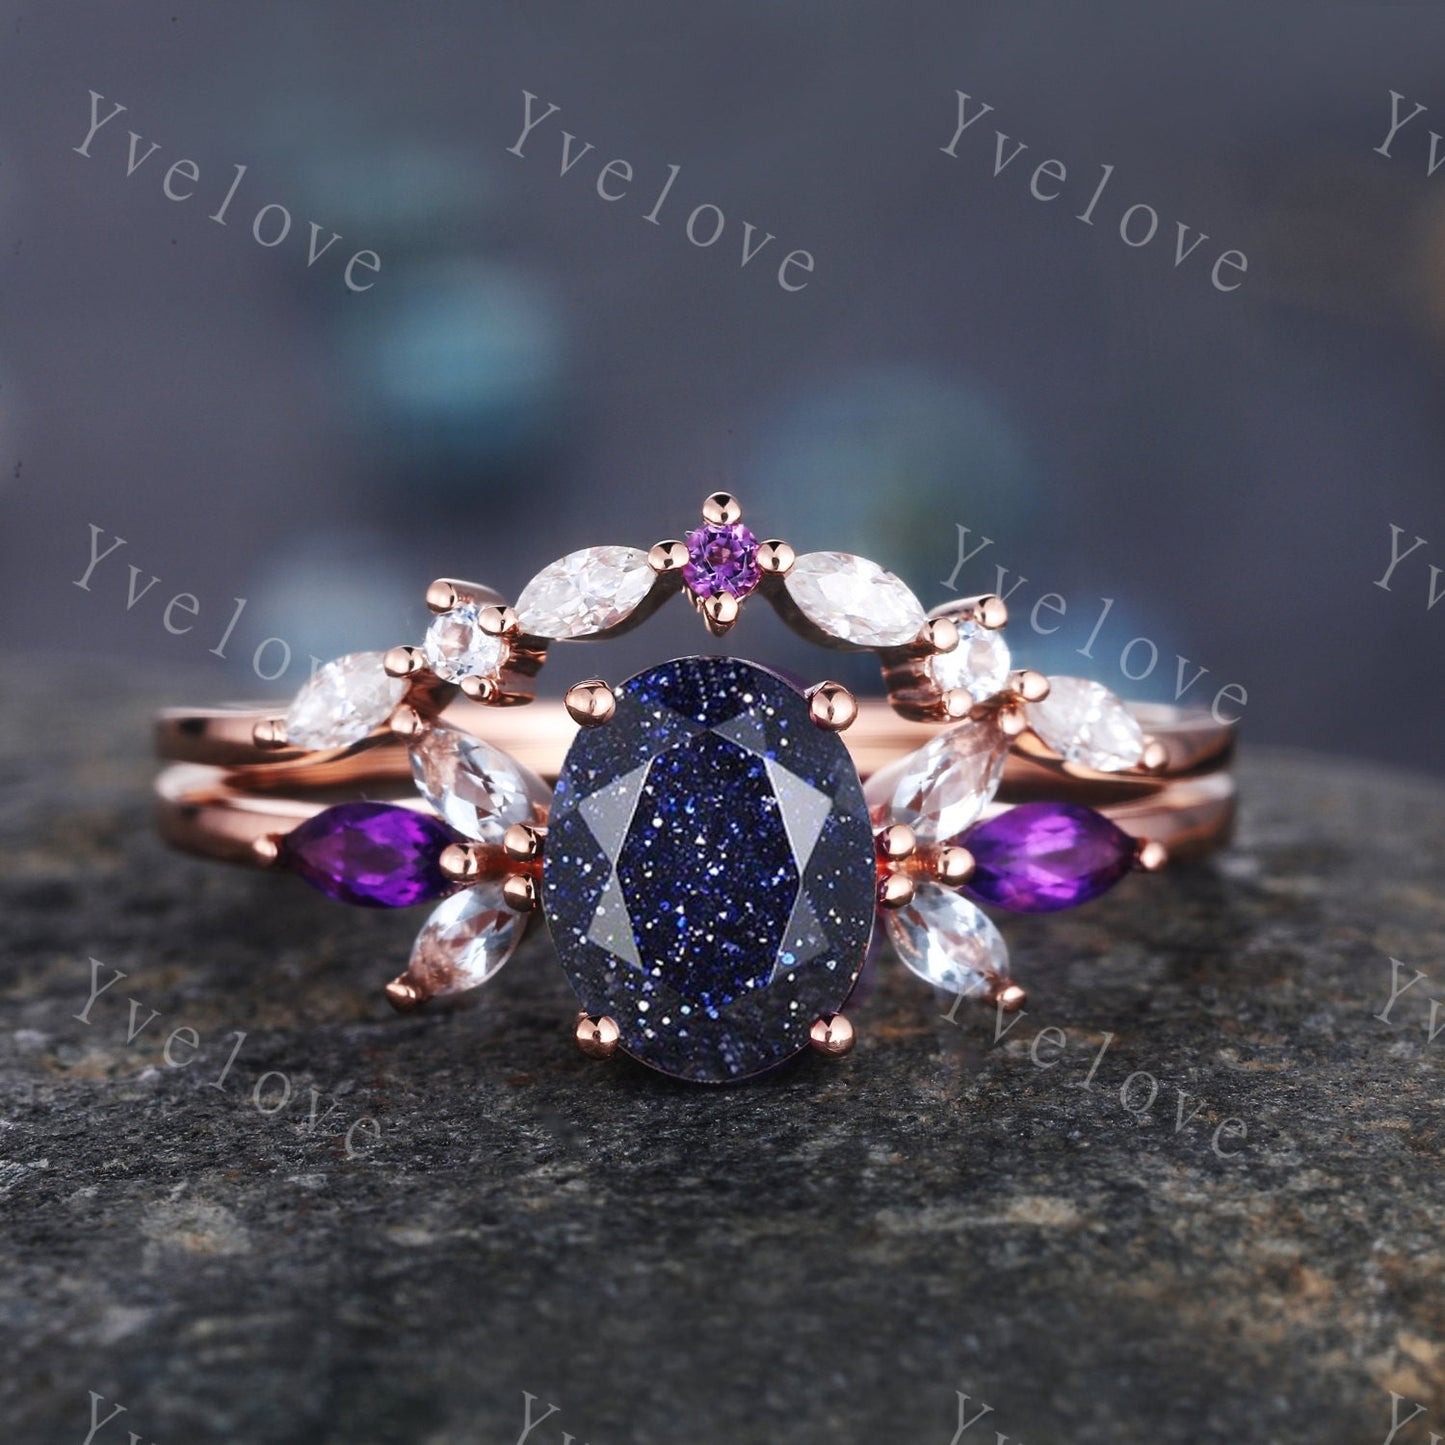 Vintage Blue Sandstone Engagement Ring set Unique Rose Gold Oval cut Bridal set Art deco curved stacking band promise anniversary rings gift